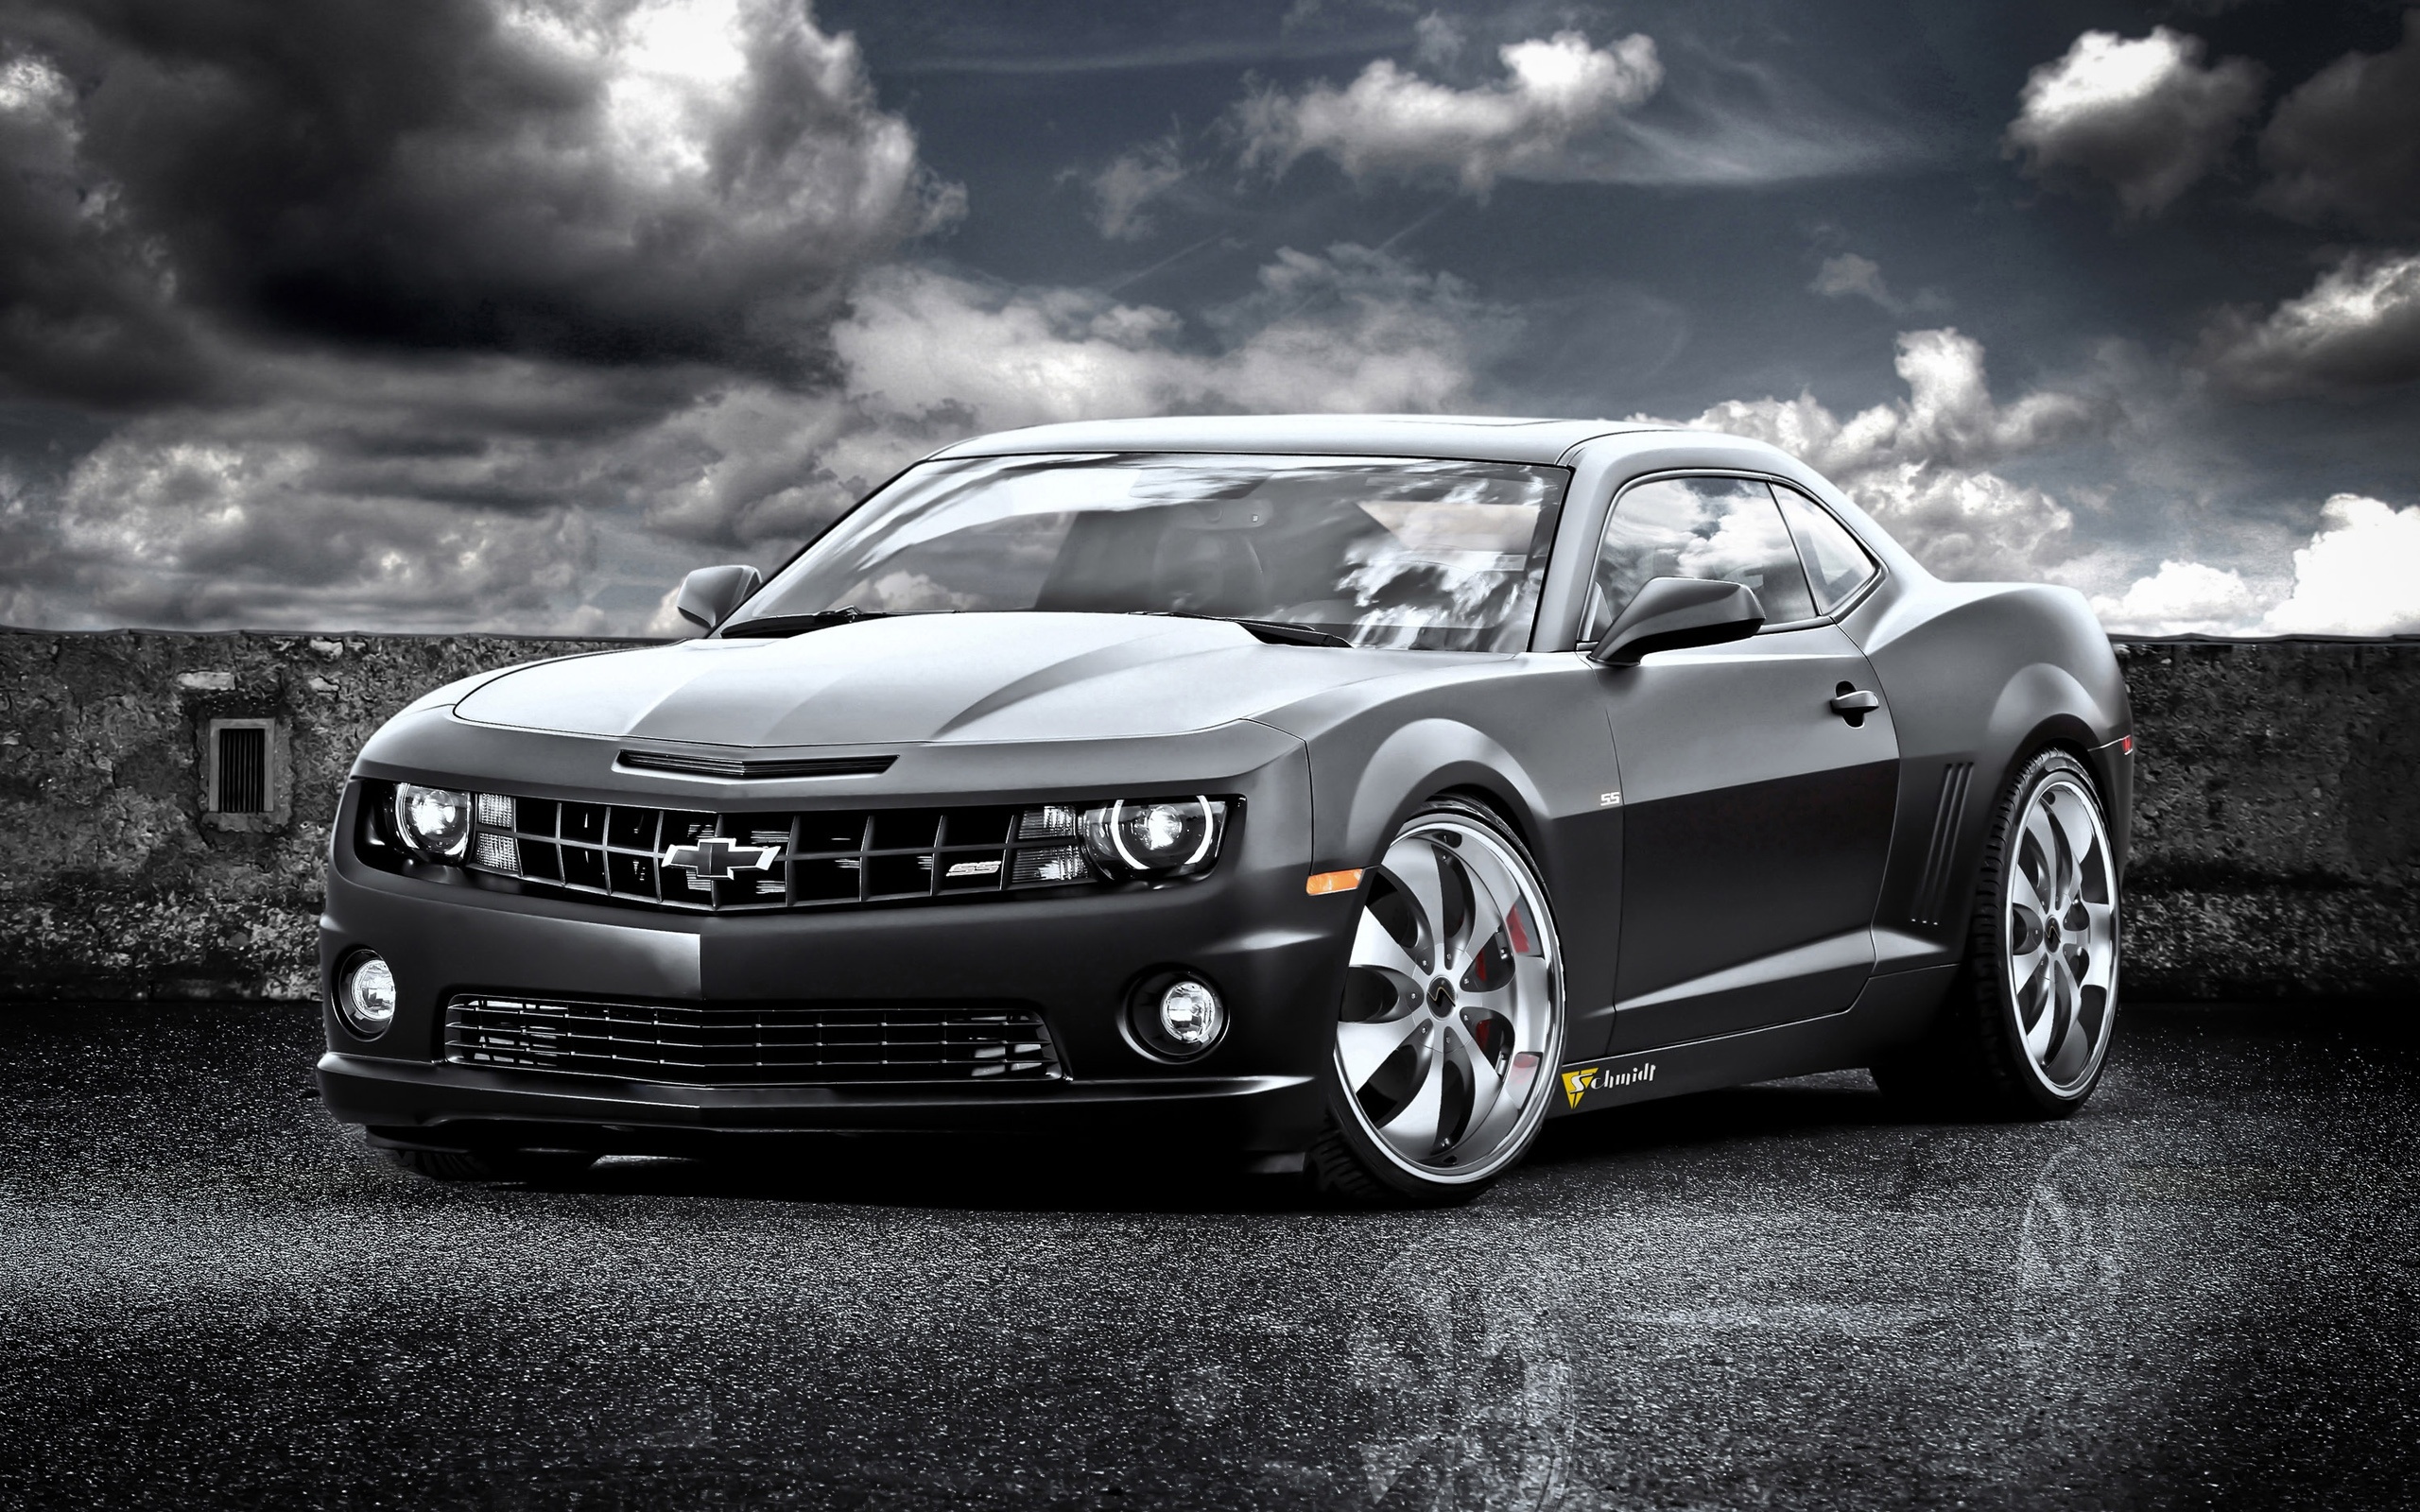 Chevrolet Camaro SS Wallpapers HD Wallpapers 2560x1600